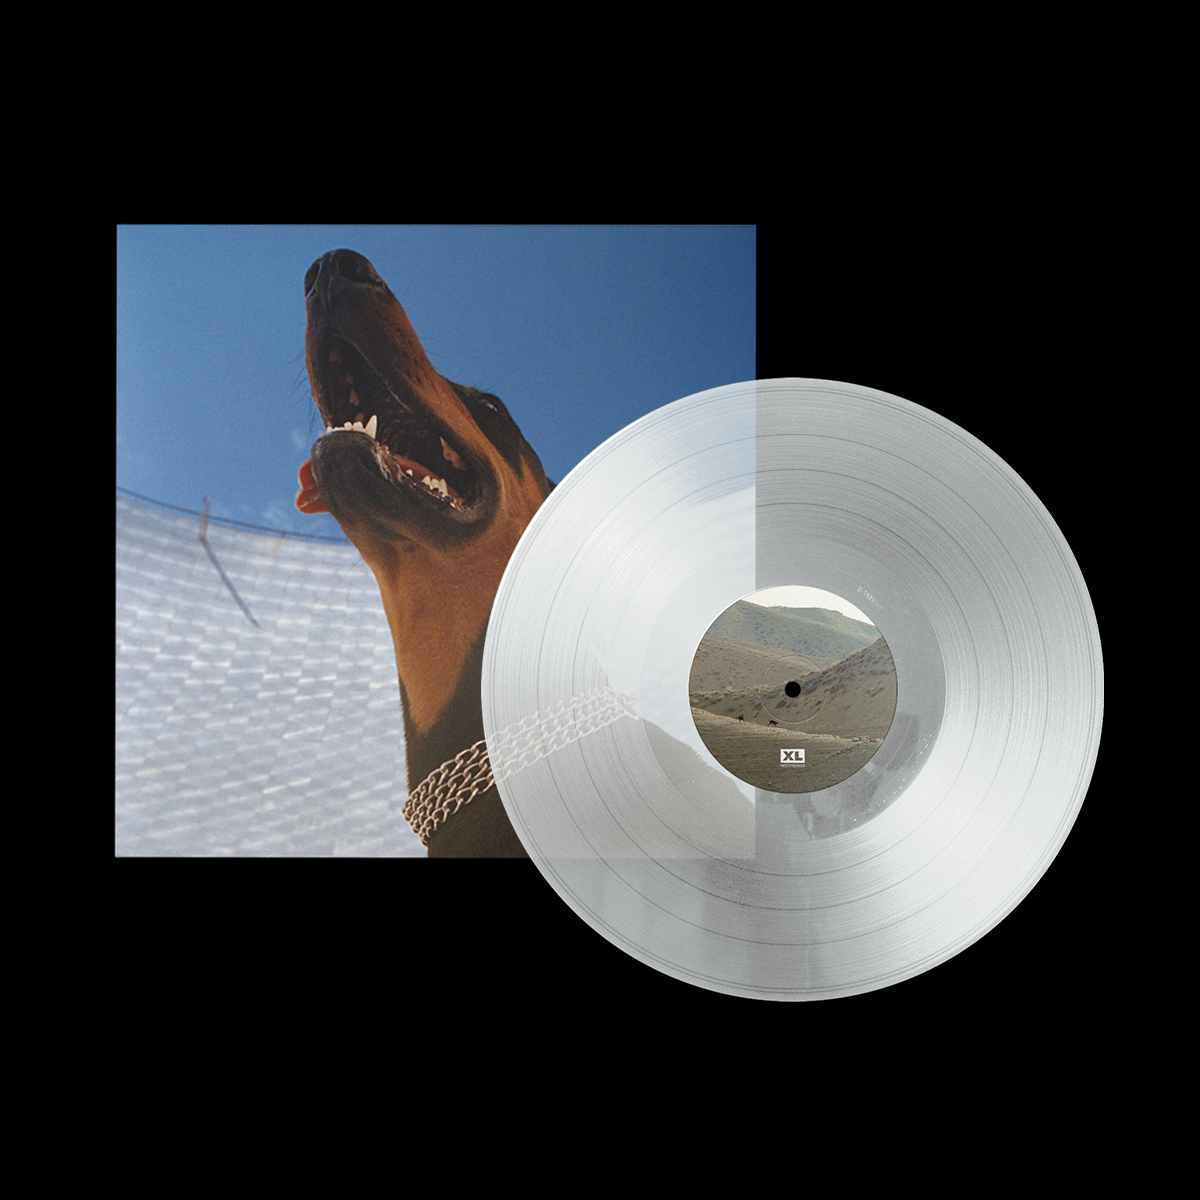 Overmono - Good Lies: Limited Edition Crystal Clear Vinyl LP